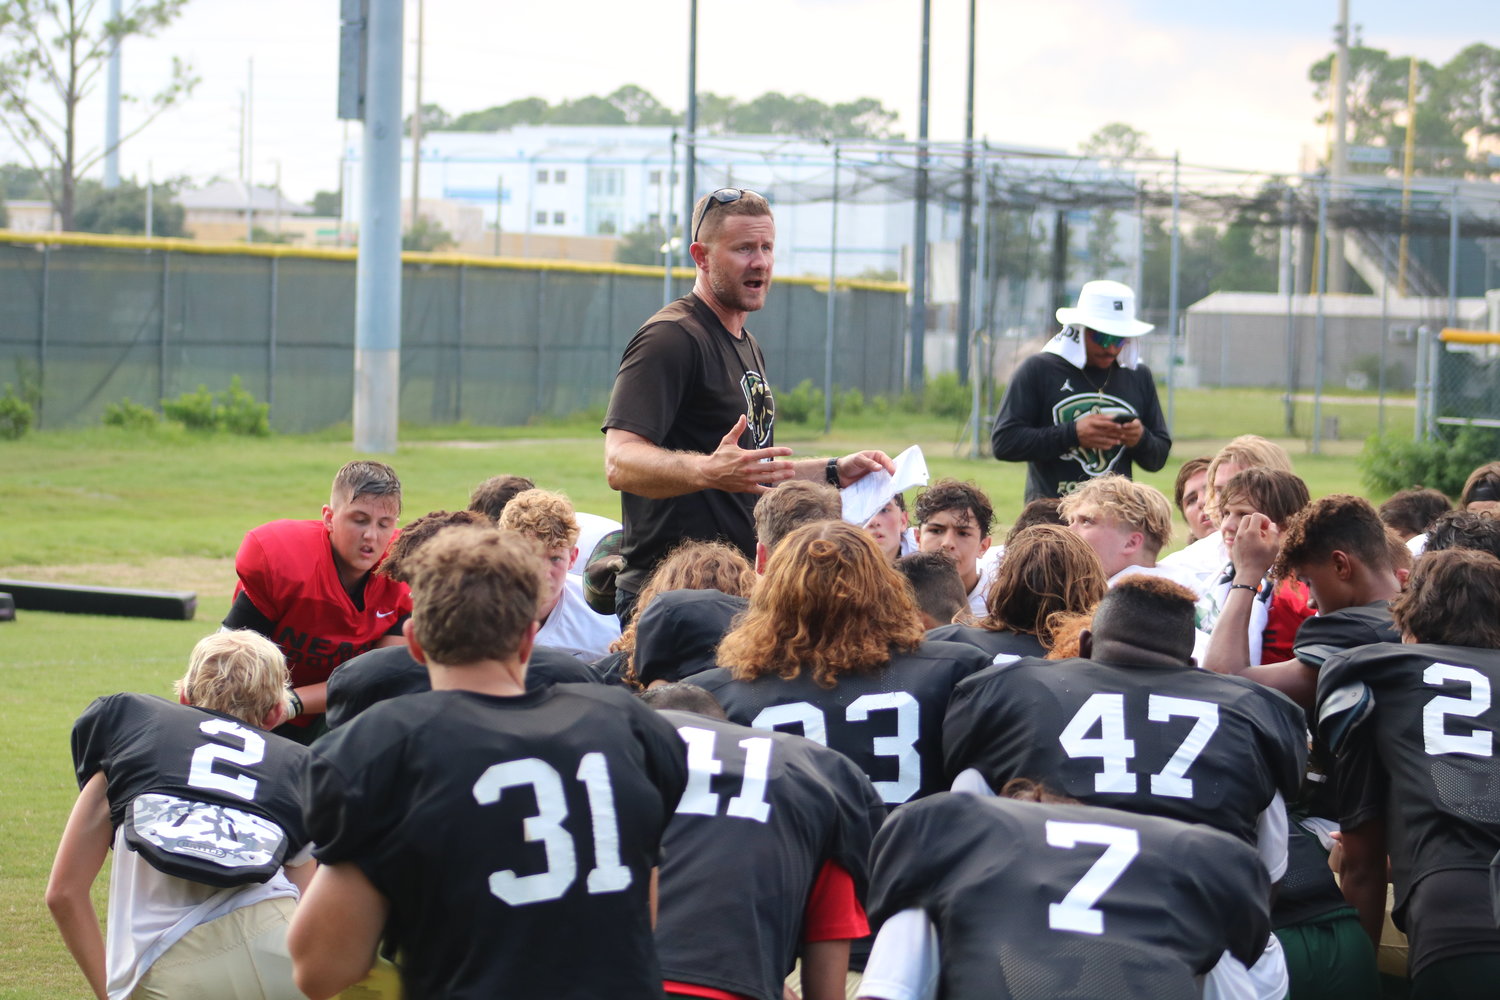 Nease head coach Collin Drafts speaks to the team following practice.